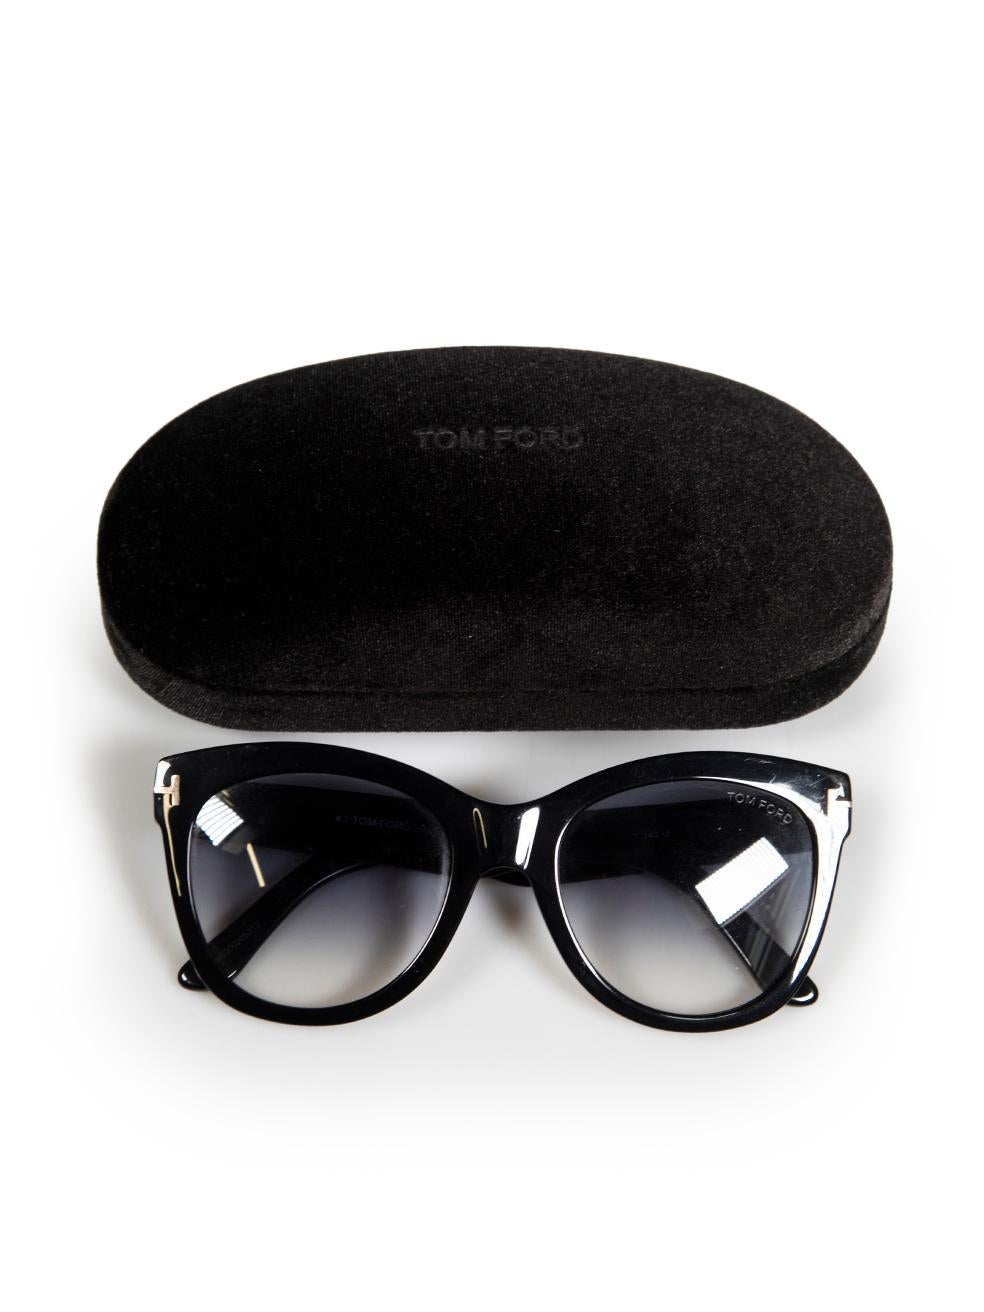 Tom Ford Black Wallace Round Sunglasses For Sale 2